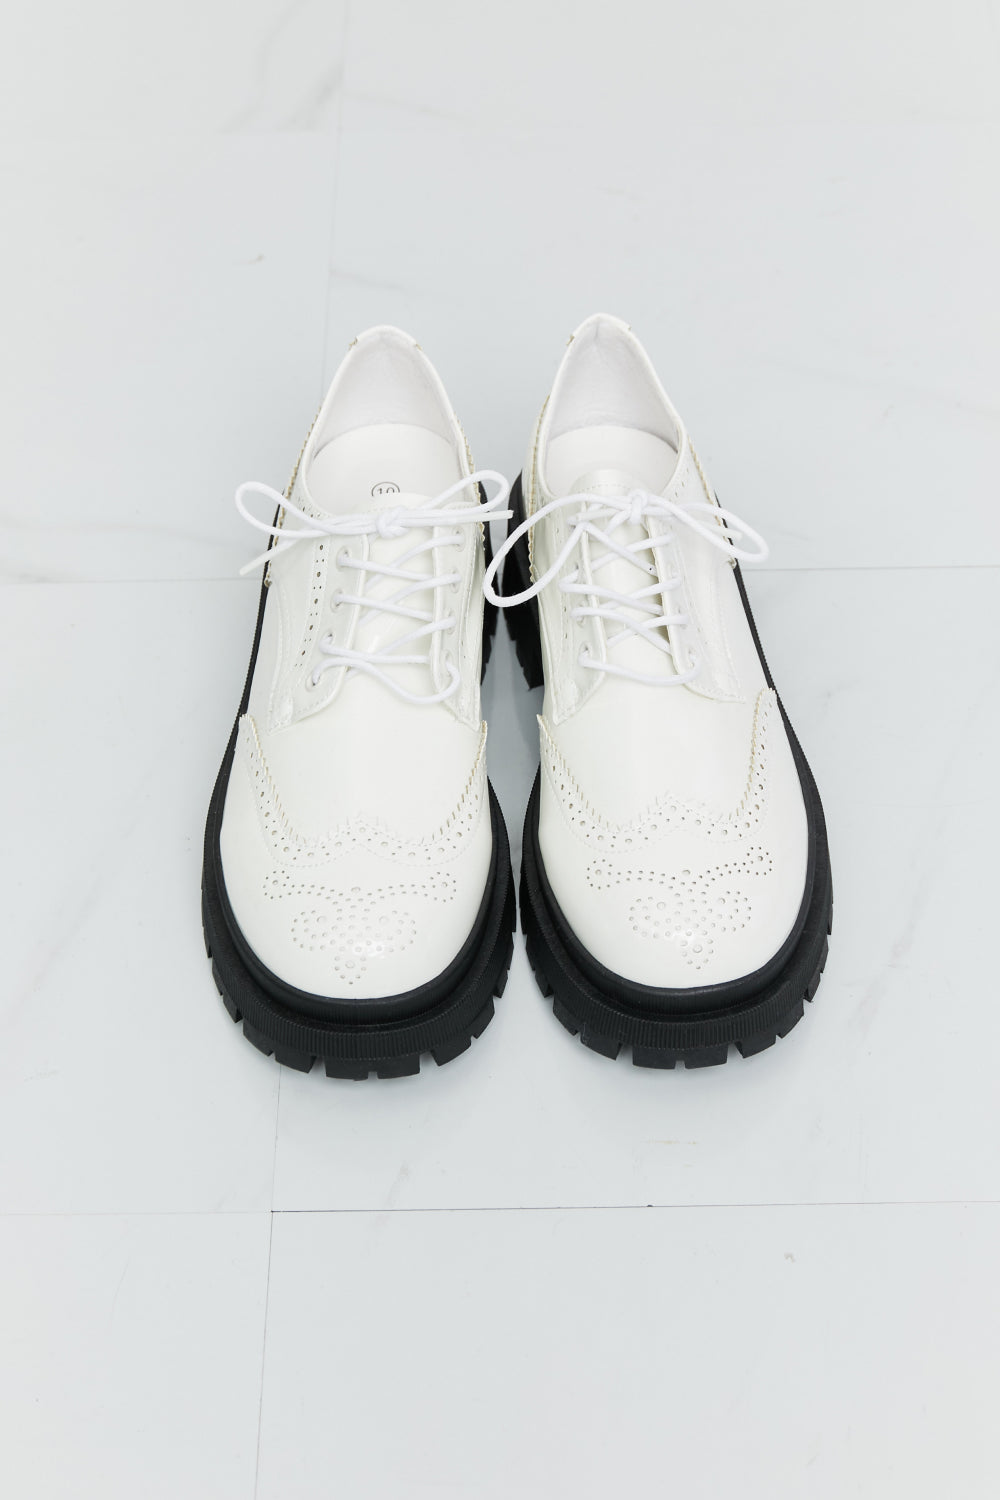 Womens White Wingtip Lace Up Oxford Brogue Loafers black platform 1.5 inch wing tip toe design 80s retro emo punk vibe alternative style unique chunky heel shoe